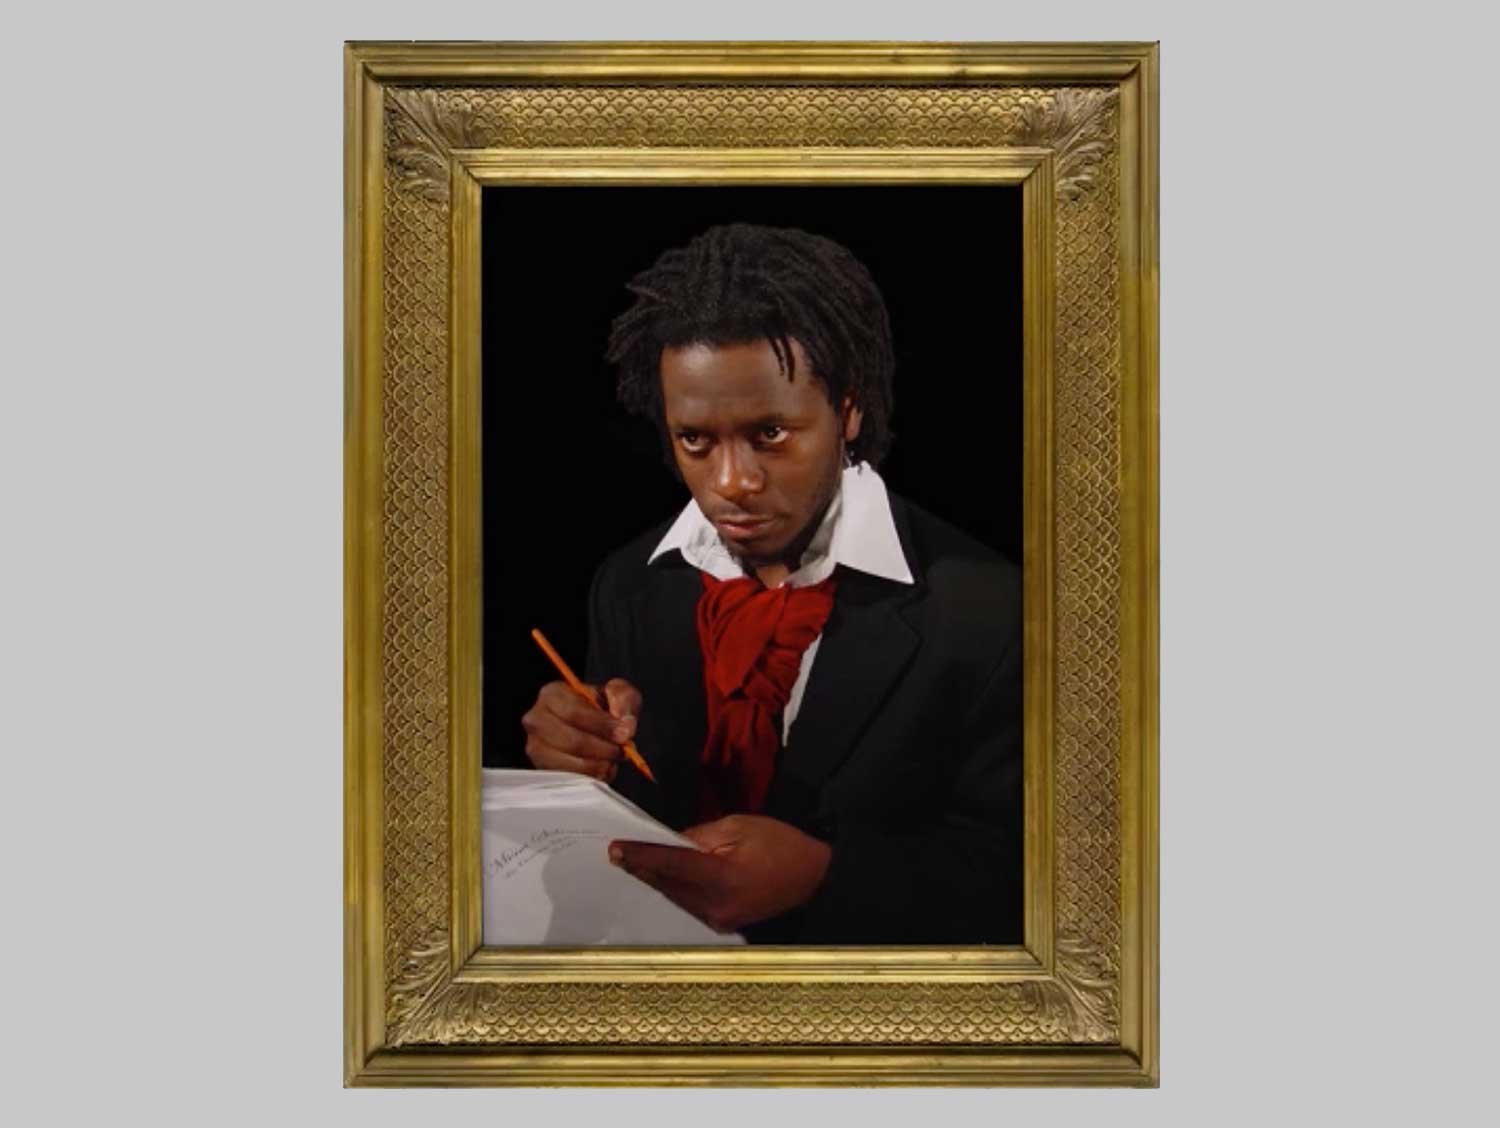 A picture frame around a man holding a writing utensil